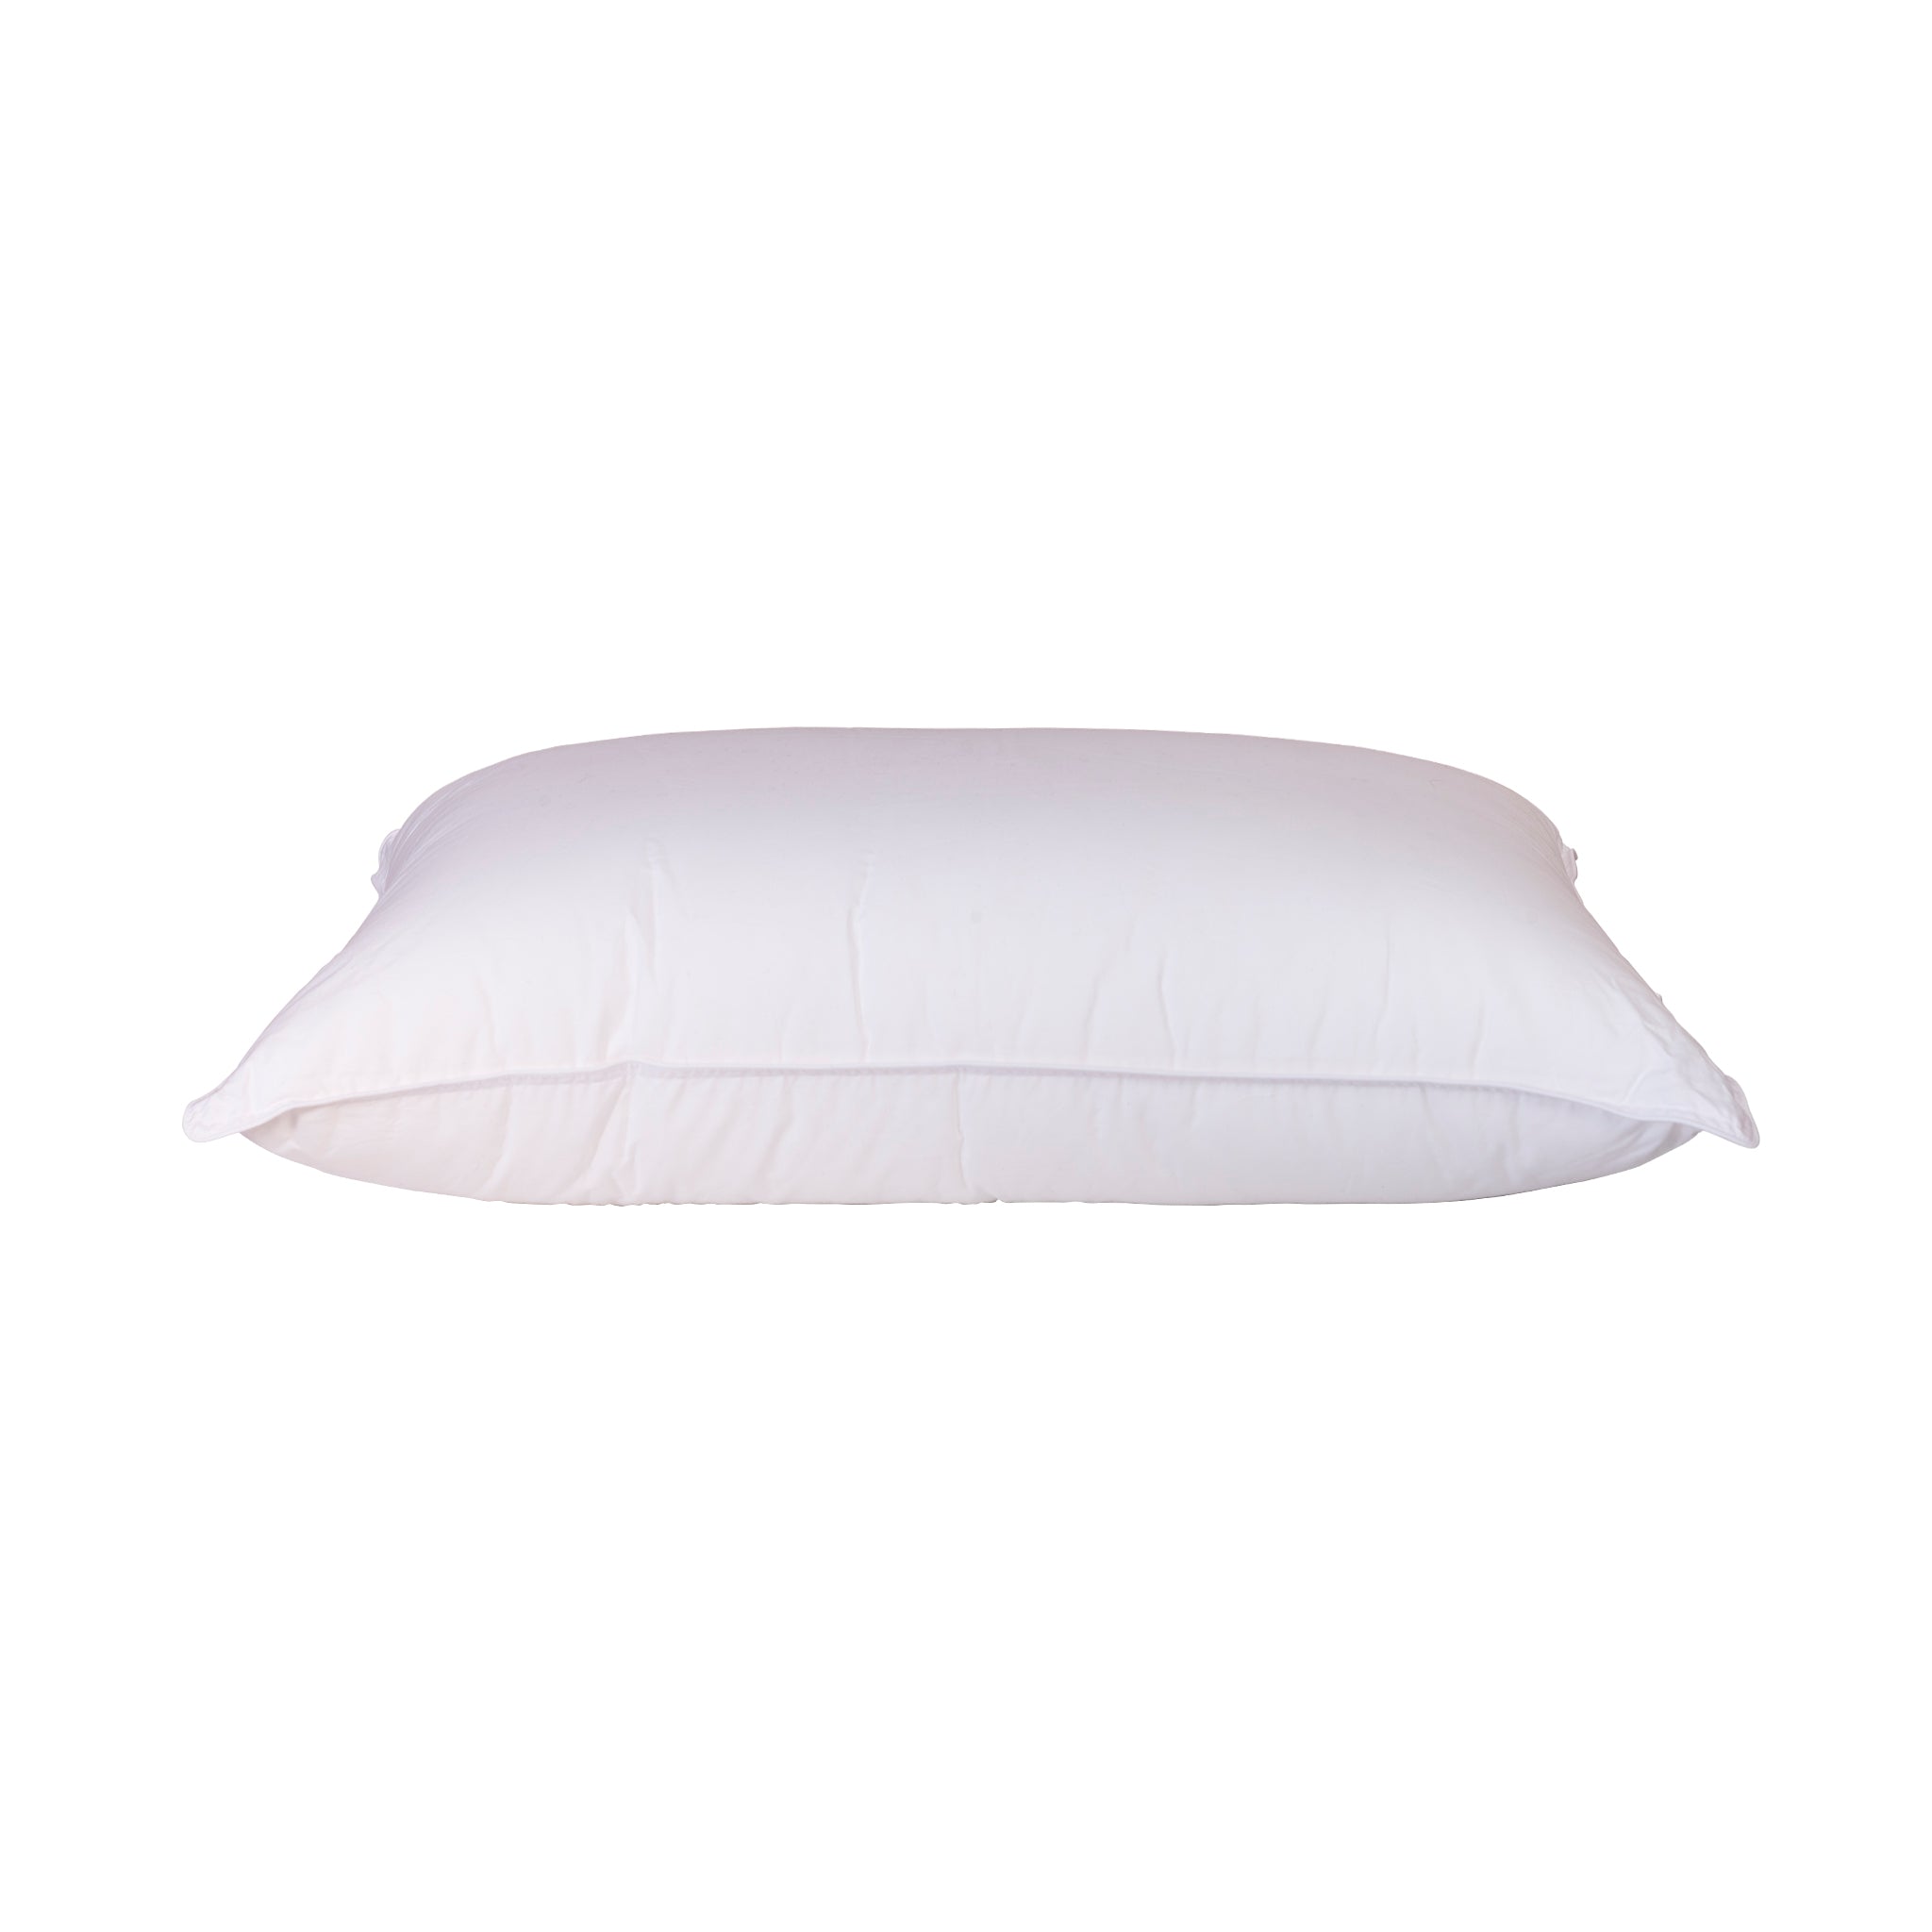 Sealy Gel Luxe Firm Pillow